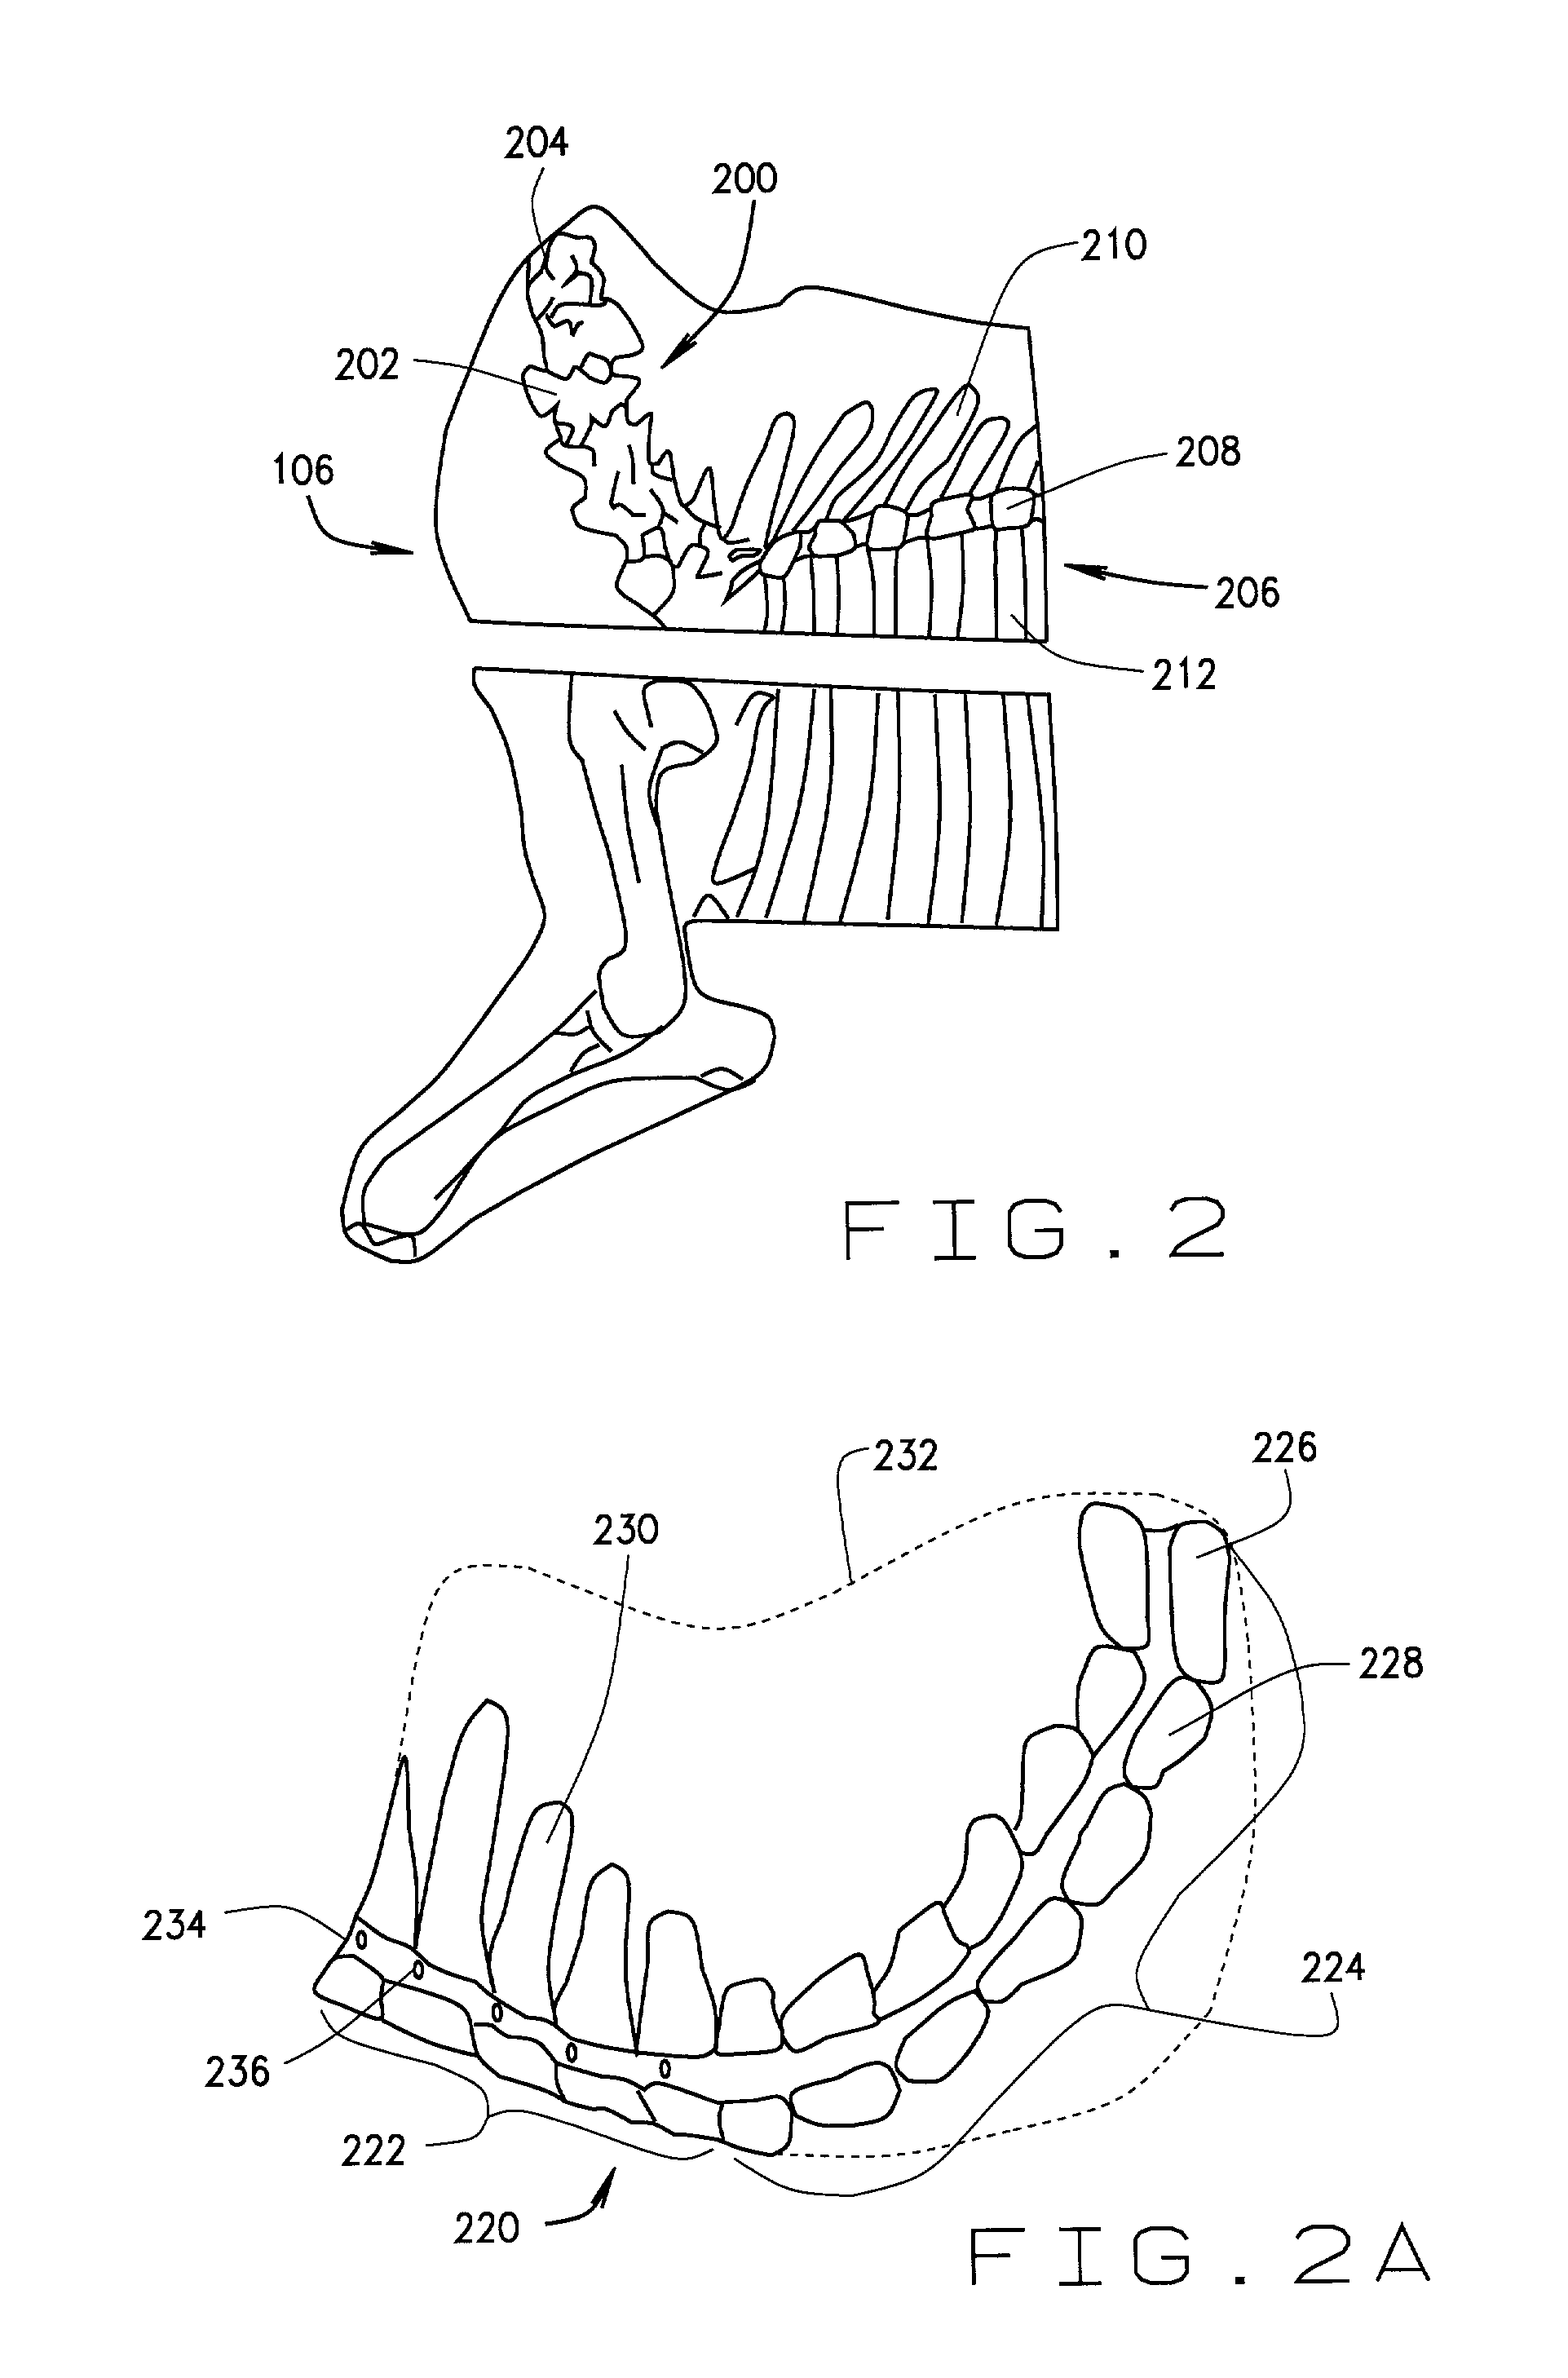 Apparatus and method for removing bones from a disassembled animal carcass